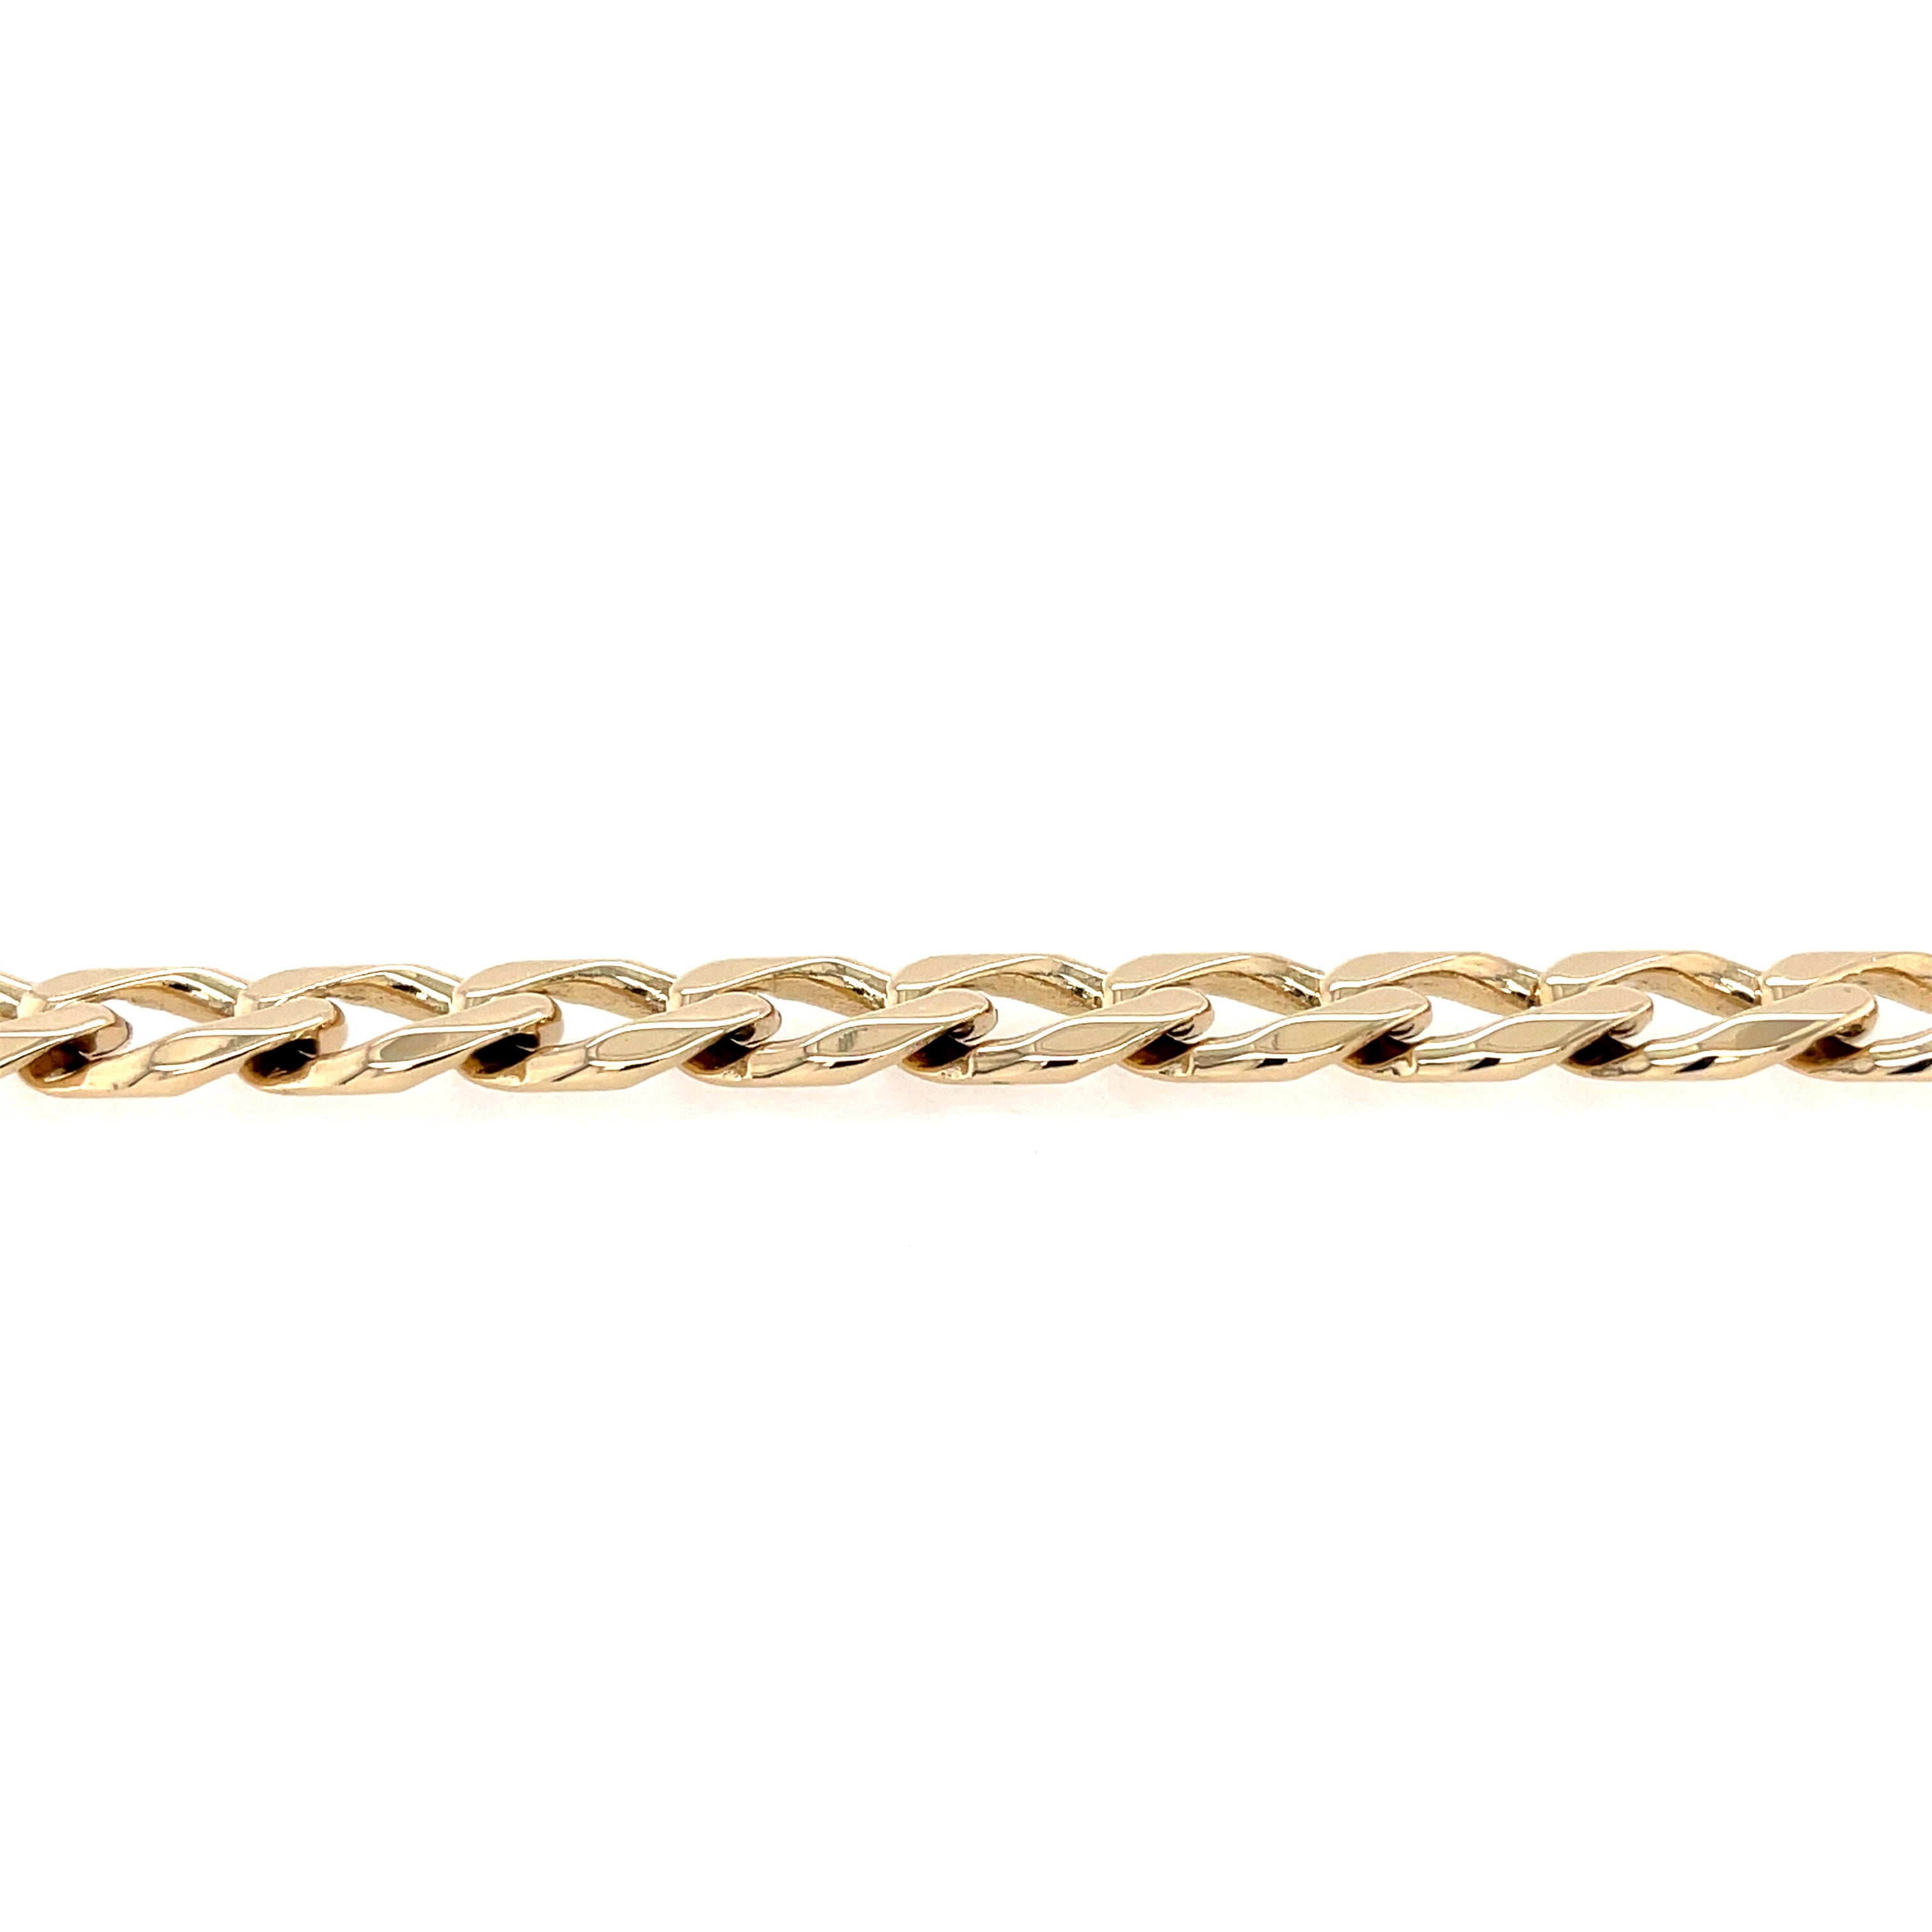 9ct Yellow Gold 9" Curb Link Bracelet - 25.05g SOLD